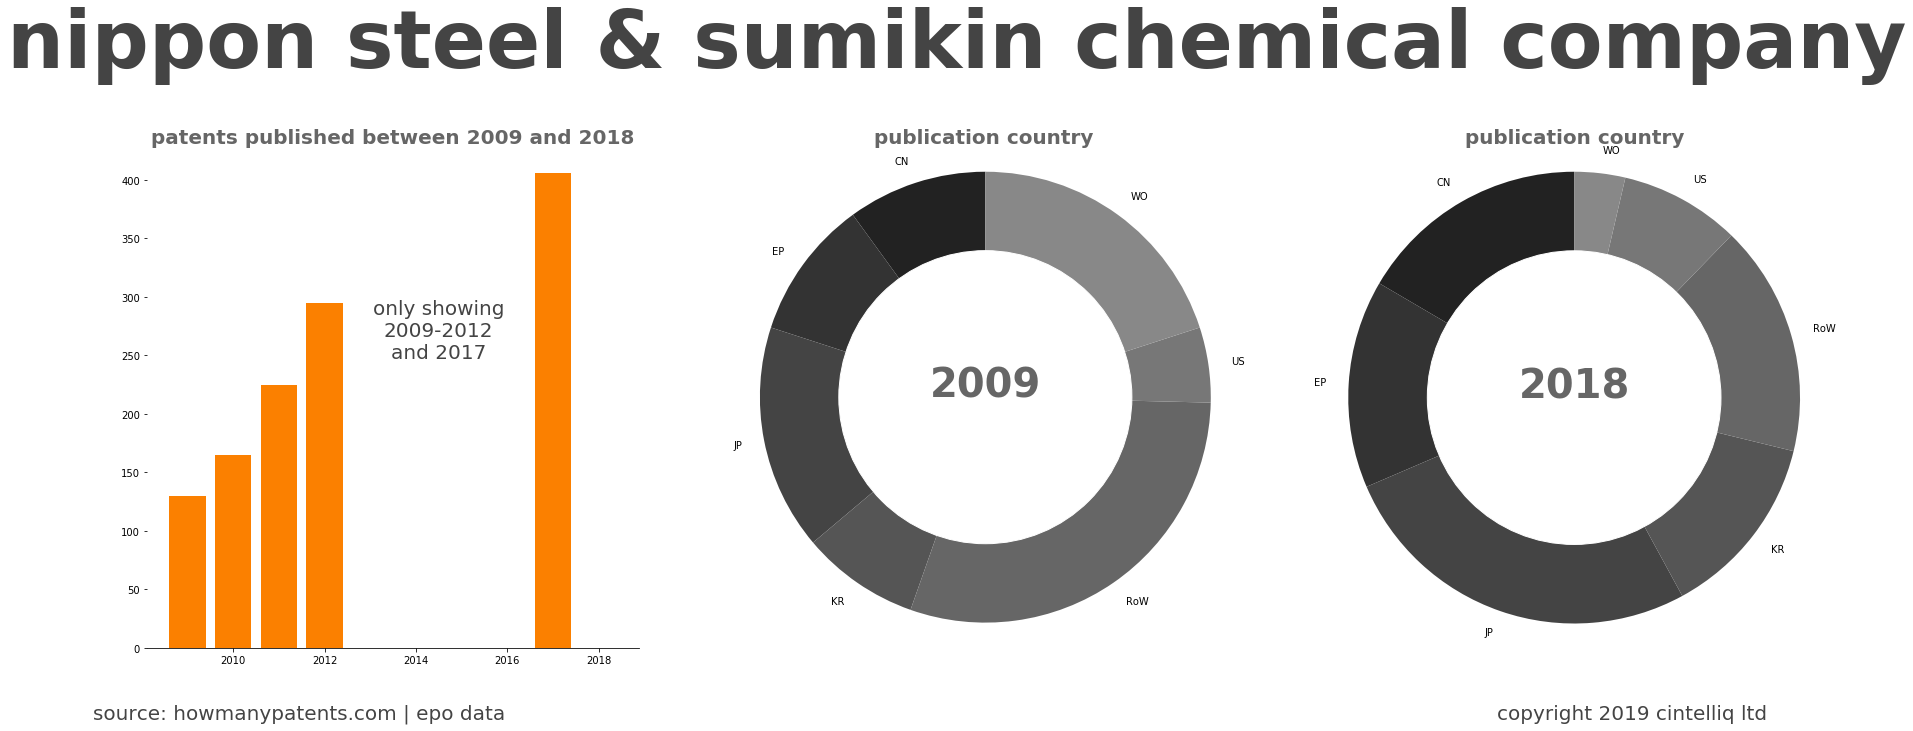 summary of patents for Nippon Steel & Sumikin Chemical Company